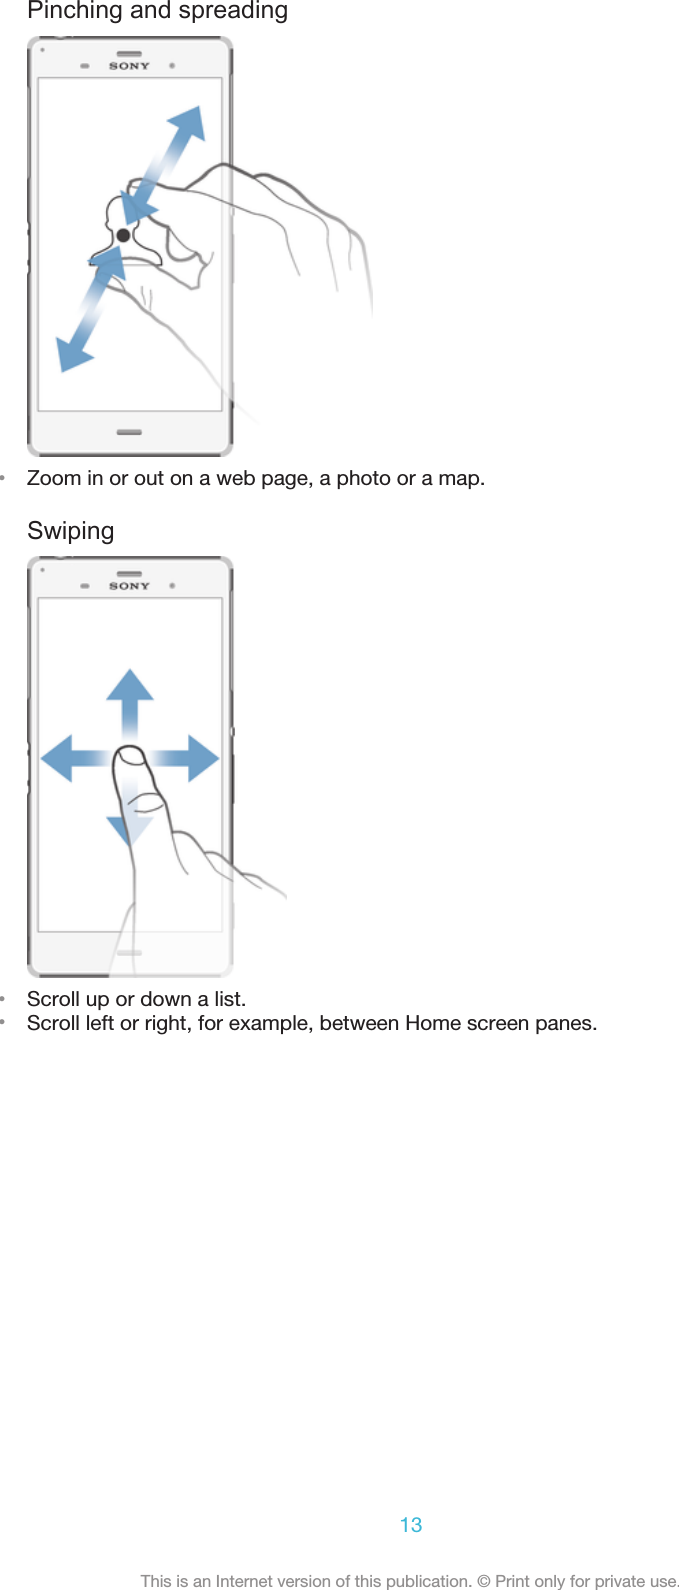 Pinching and spreading•Zoom in or out on a web page, a photo or a map.Swiping•Scroll up or down a list.•Scroll left or right, for example, between Home screen panes.13This is an Internet version of this publication. © Print only for private use.